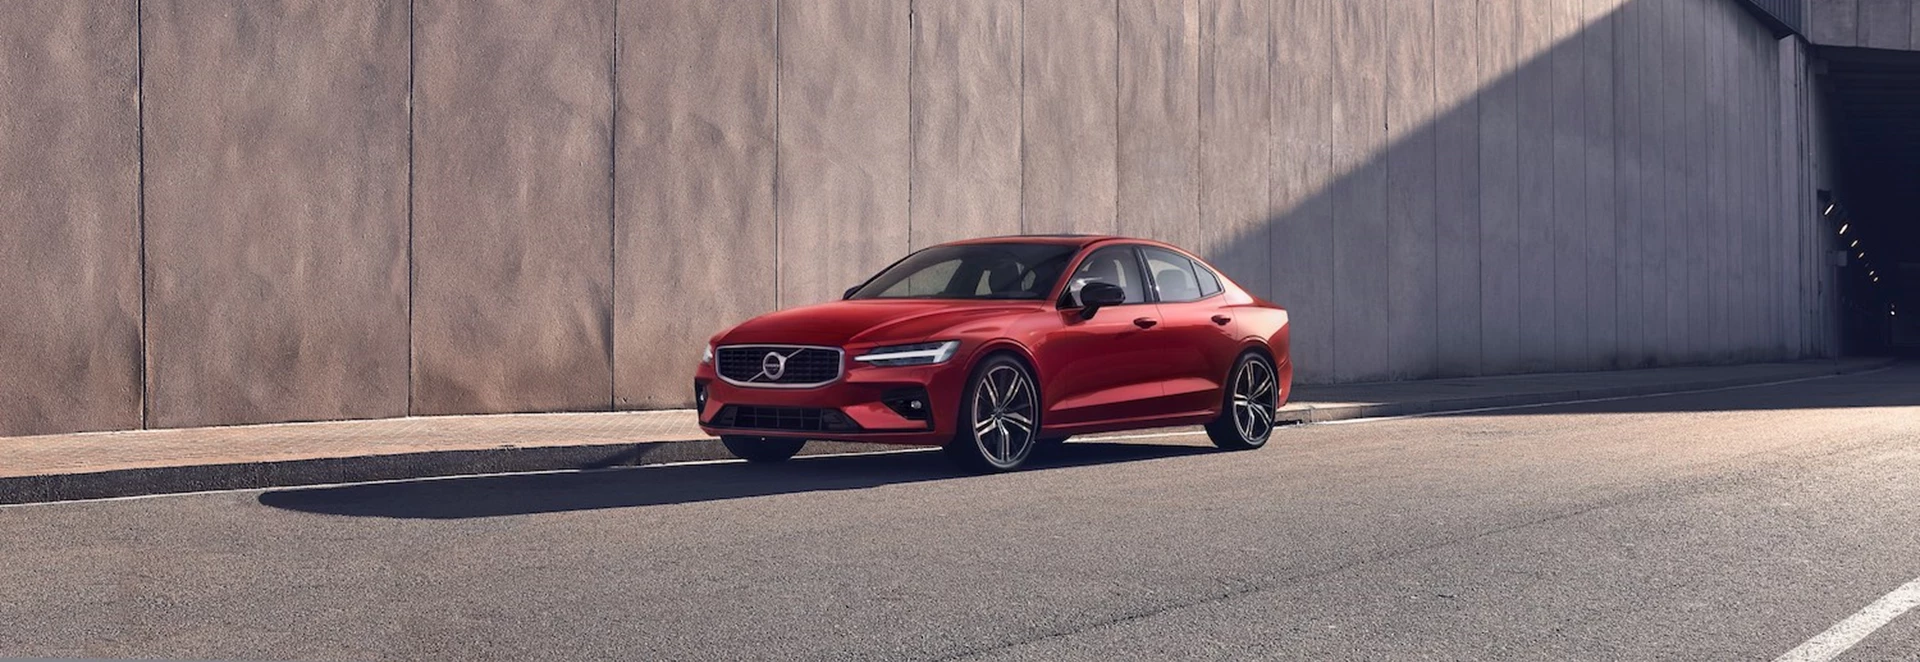 Volvo opens sales of S60 with new launch edition